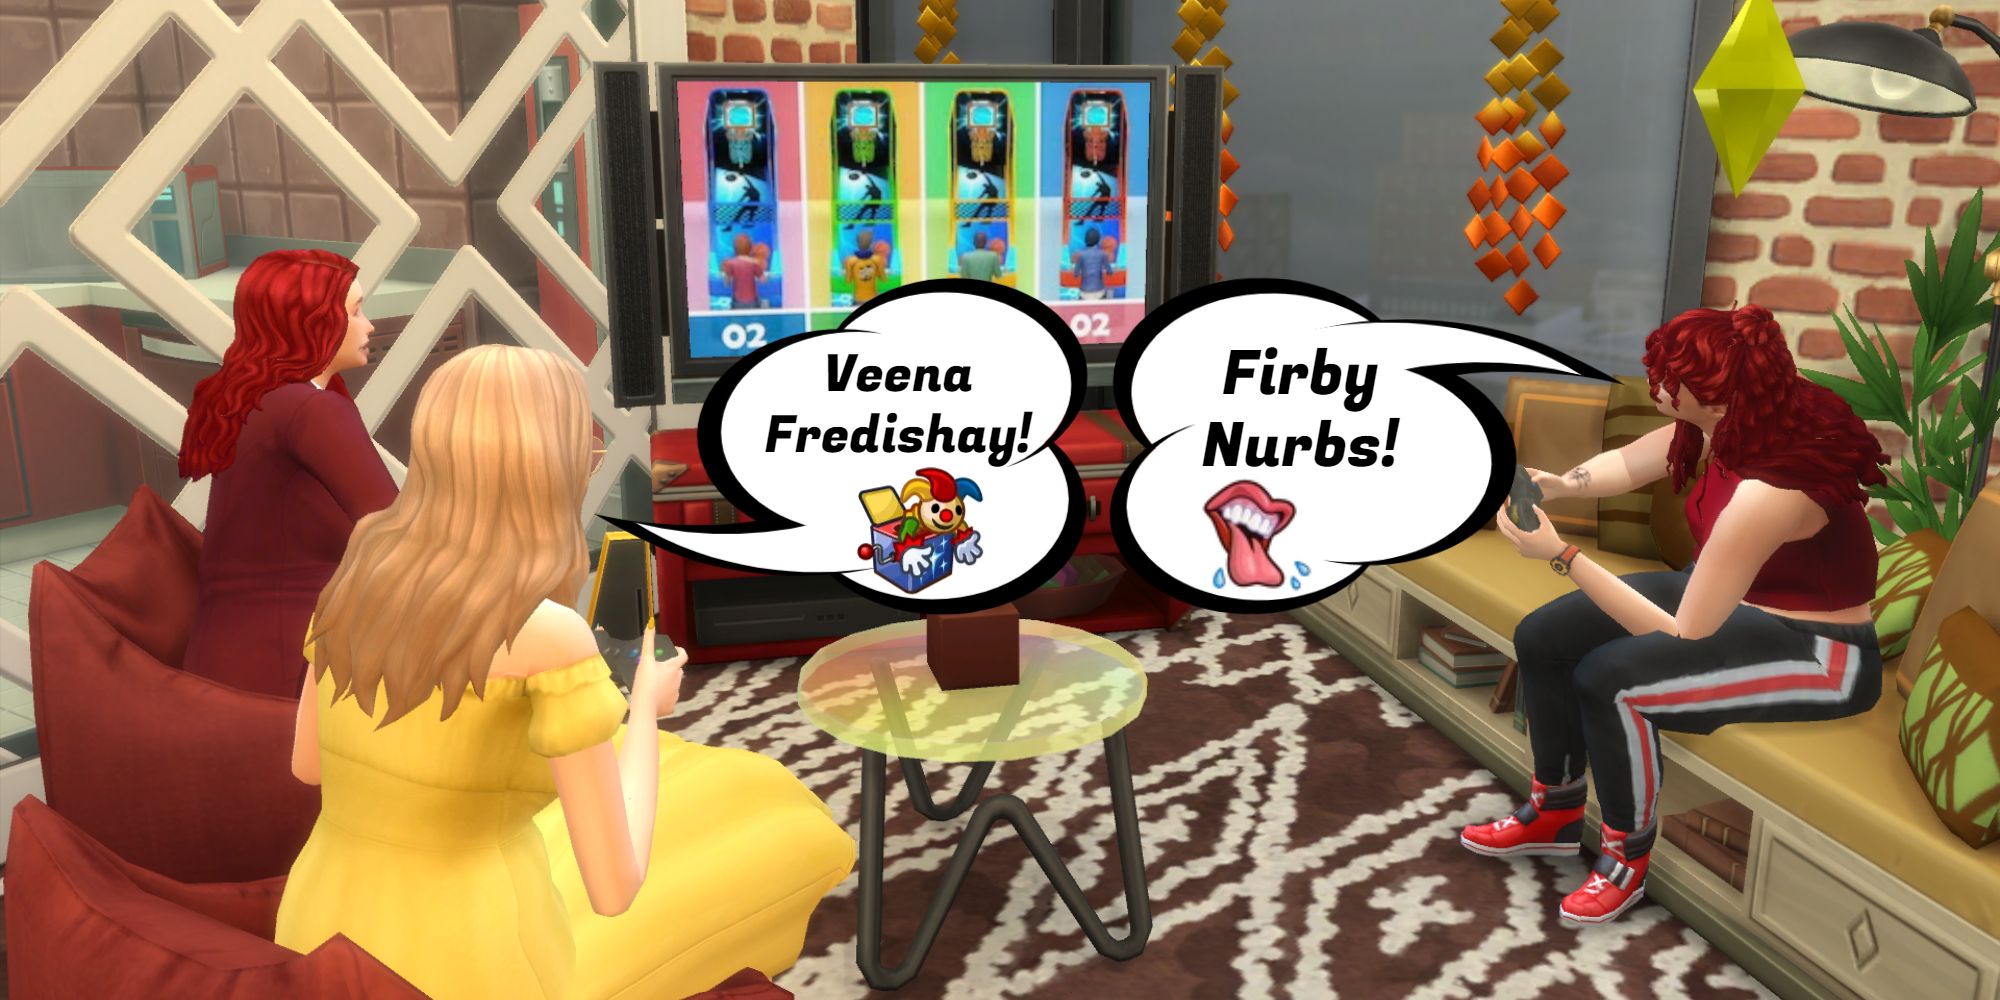 In Simlish language, the phrase Veena Fredishay means let's play. Pictured are three Sims playing a video game on the TV.